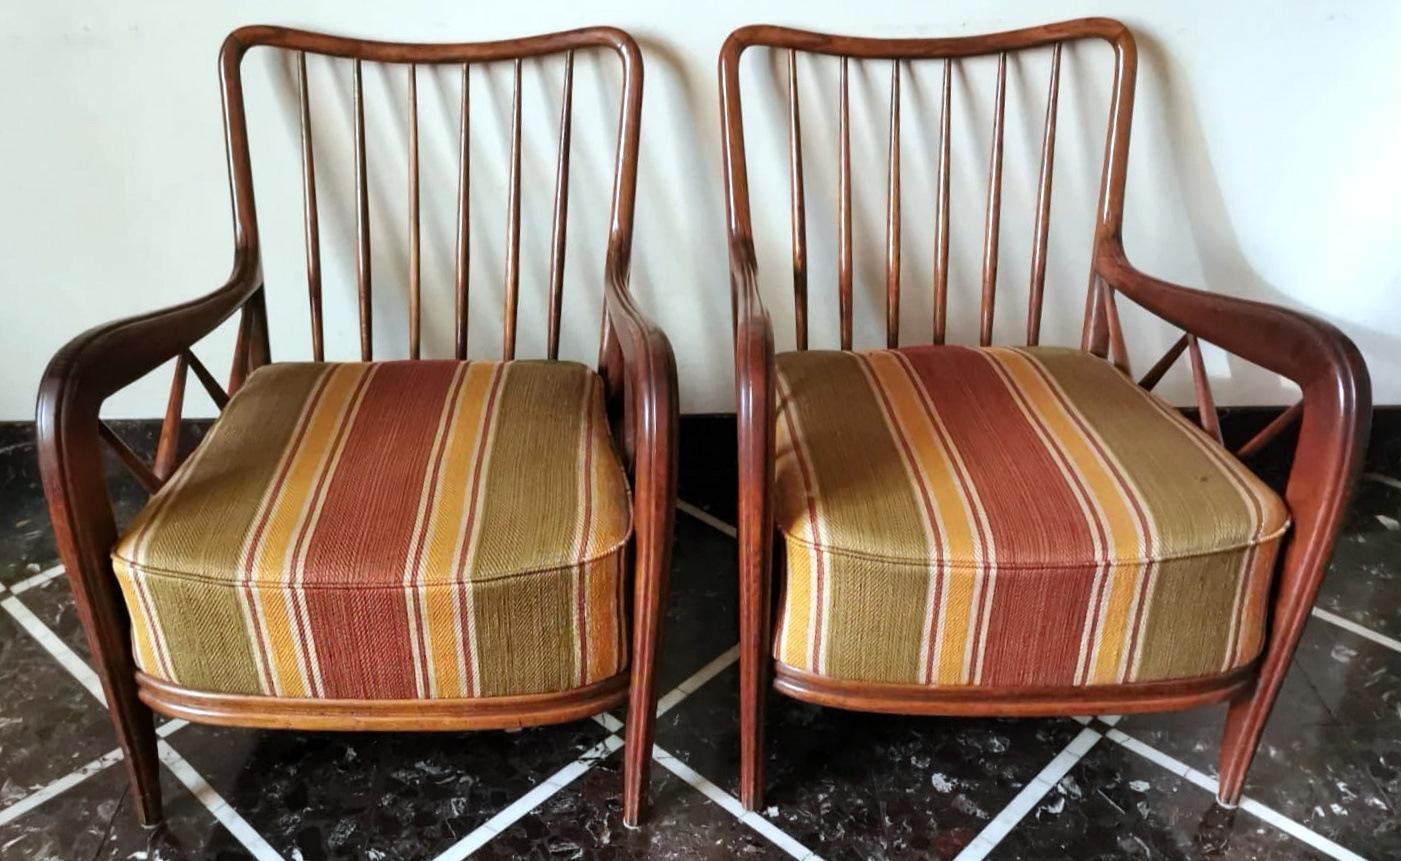 We kindly suggest that you read the whole description, as with it we try to give you detailed technical and historical information to guarantee the authenticity of our objects.
Elegant and sought-after pair of Italian cherry wood armchairs; the